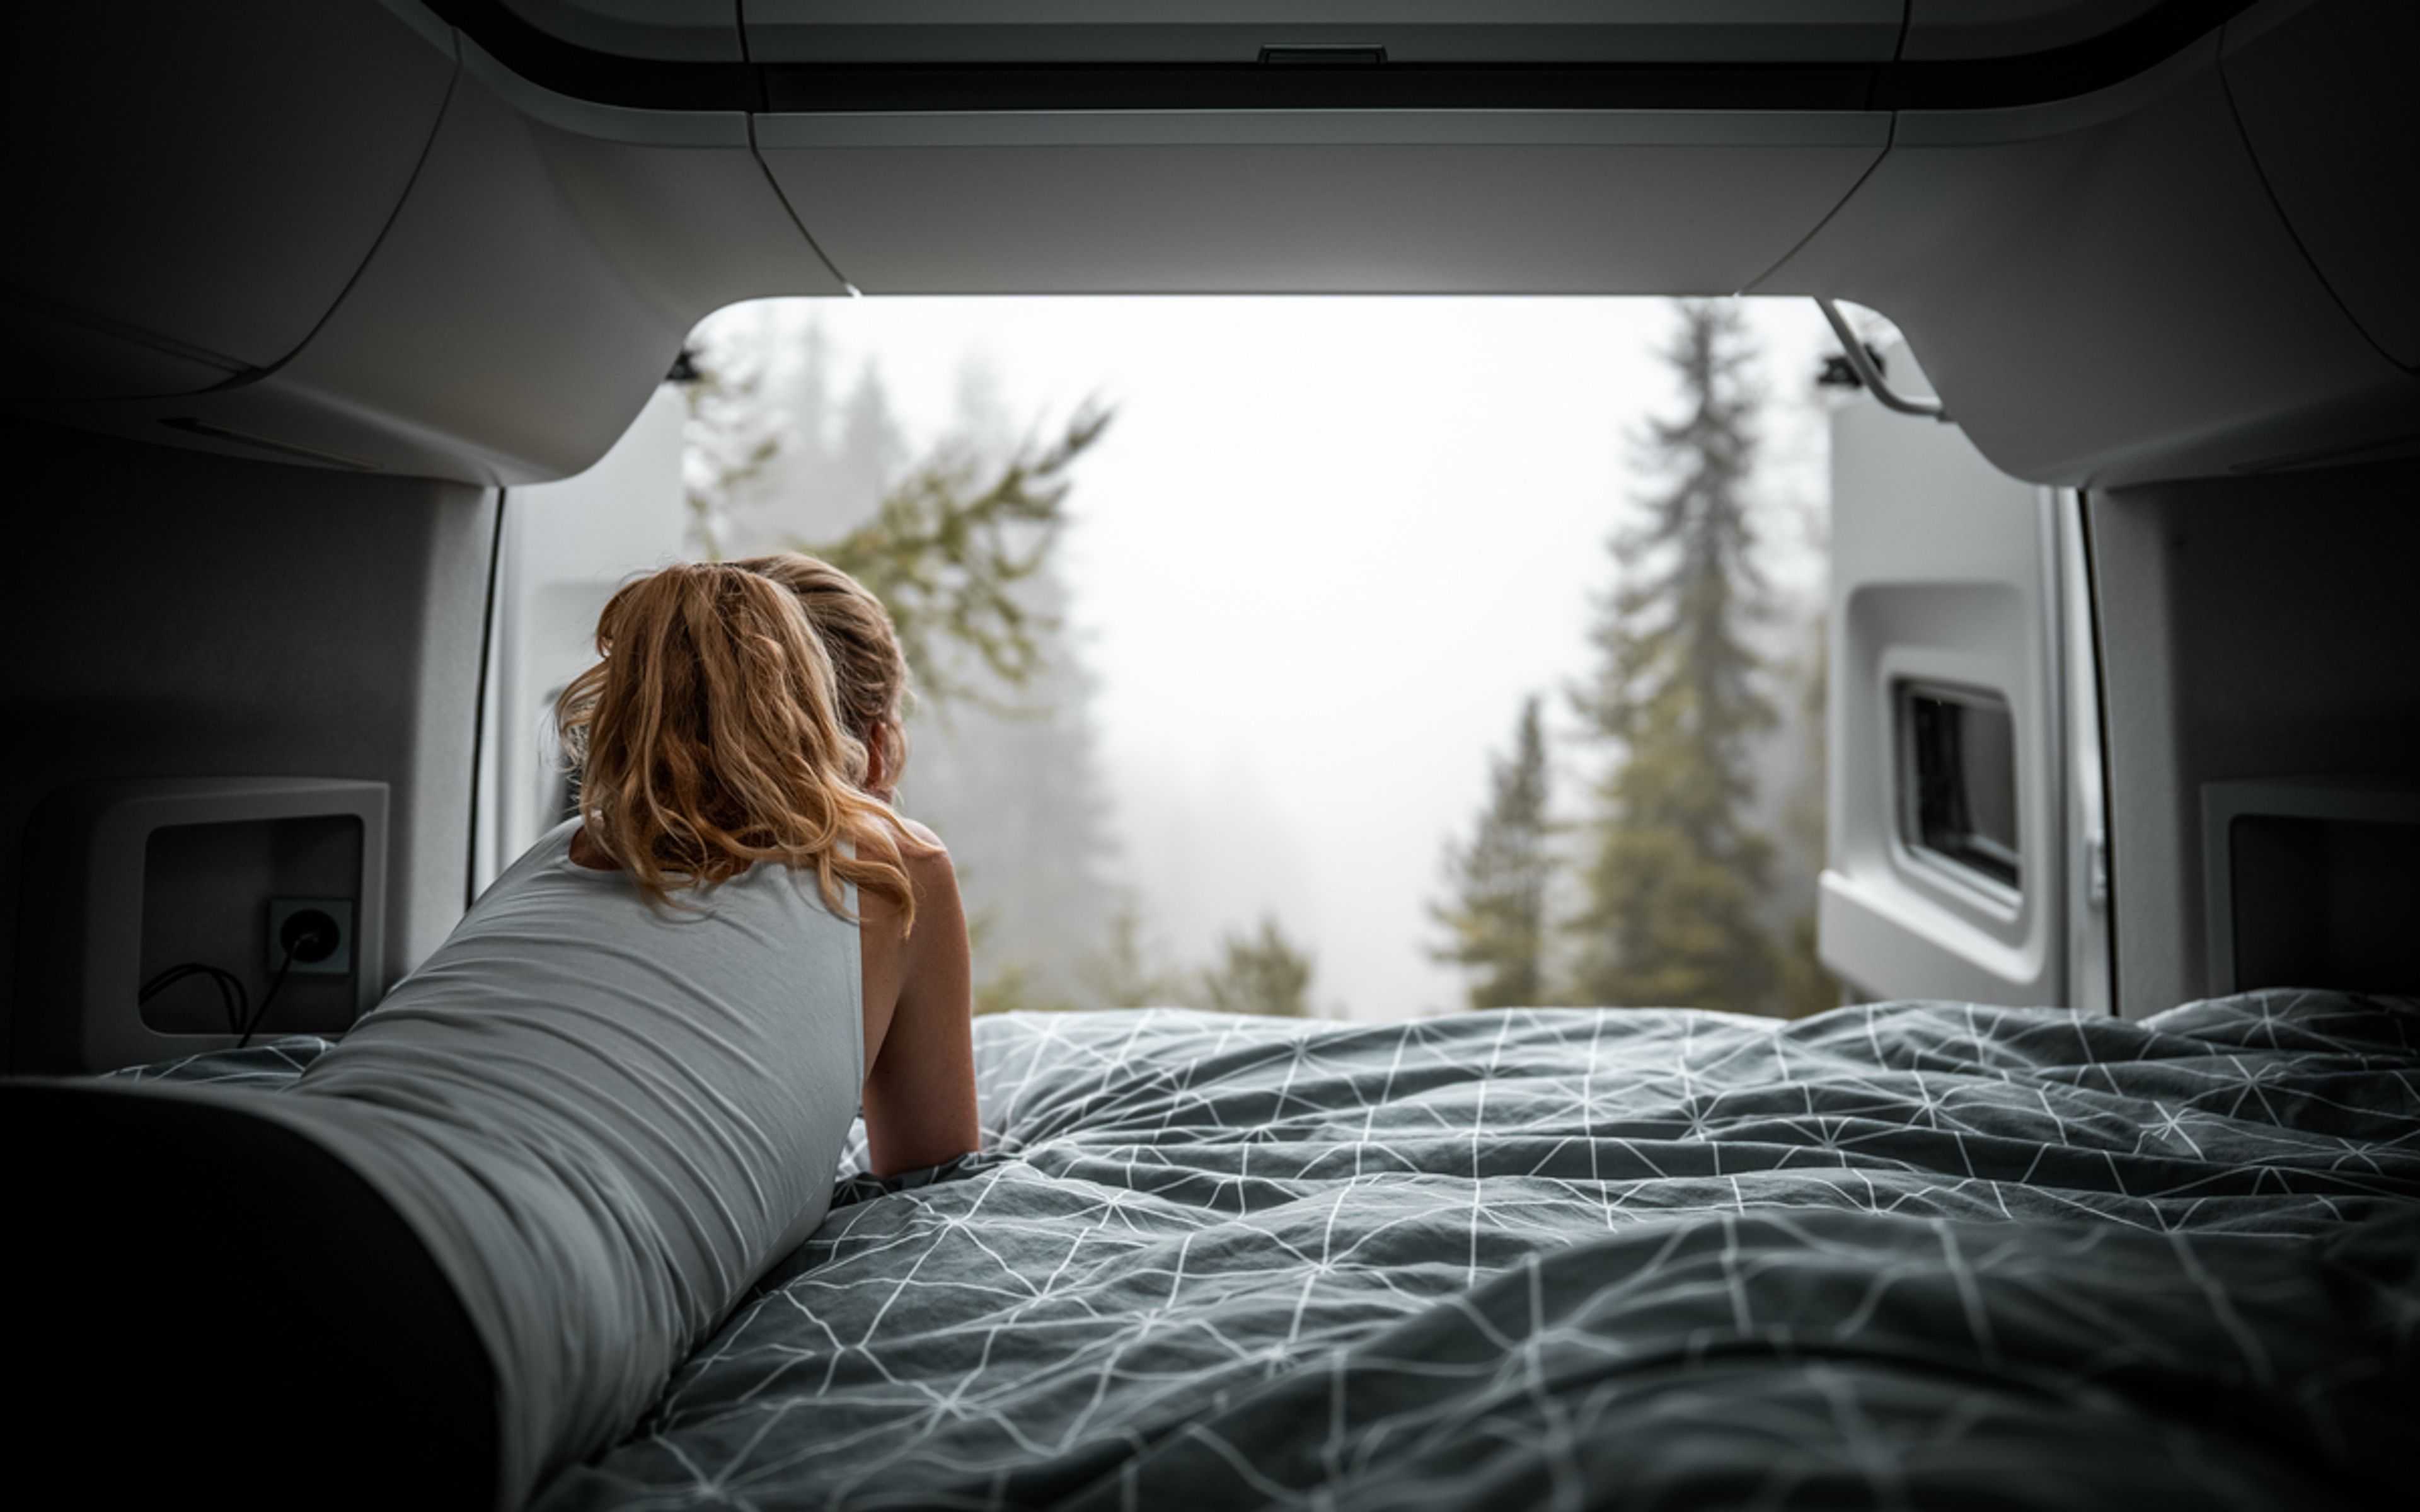 A woman laying comfortably inside the camper van enjoying the view of pine trees and foggy mountain